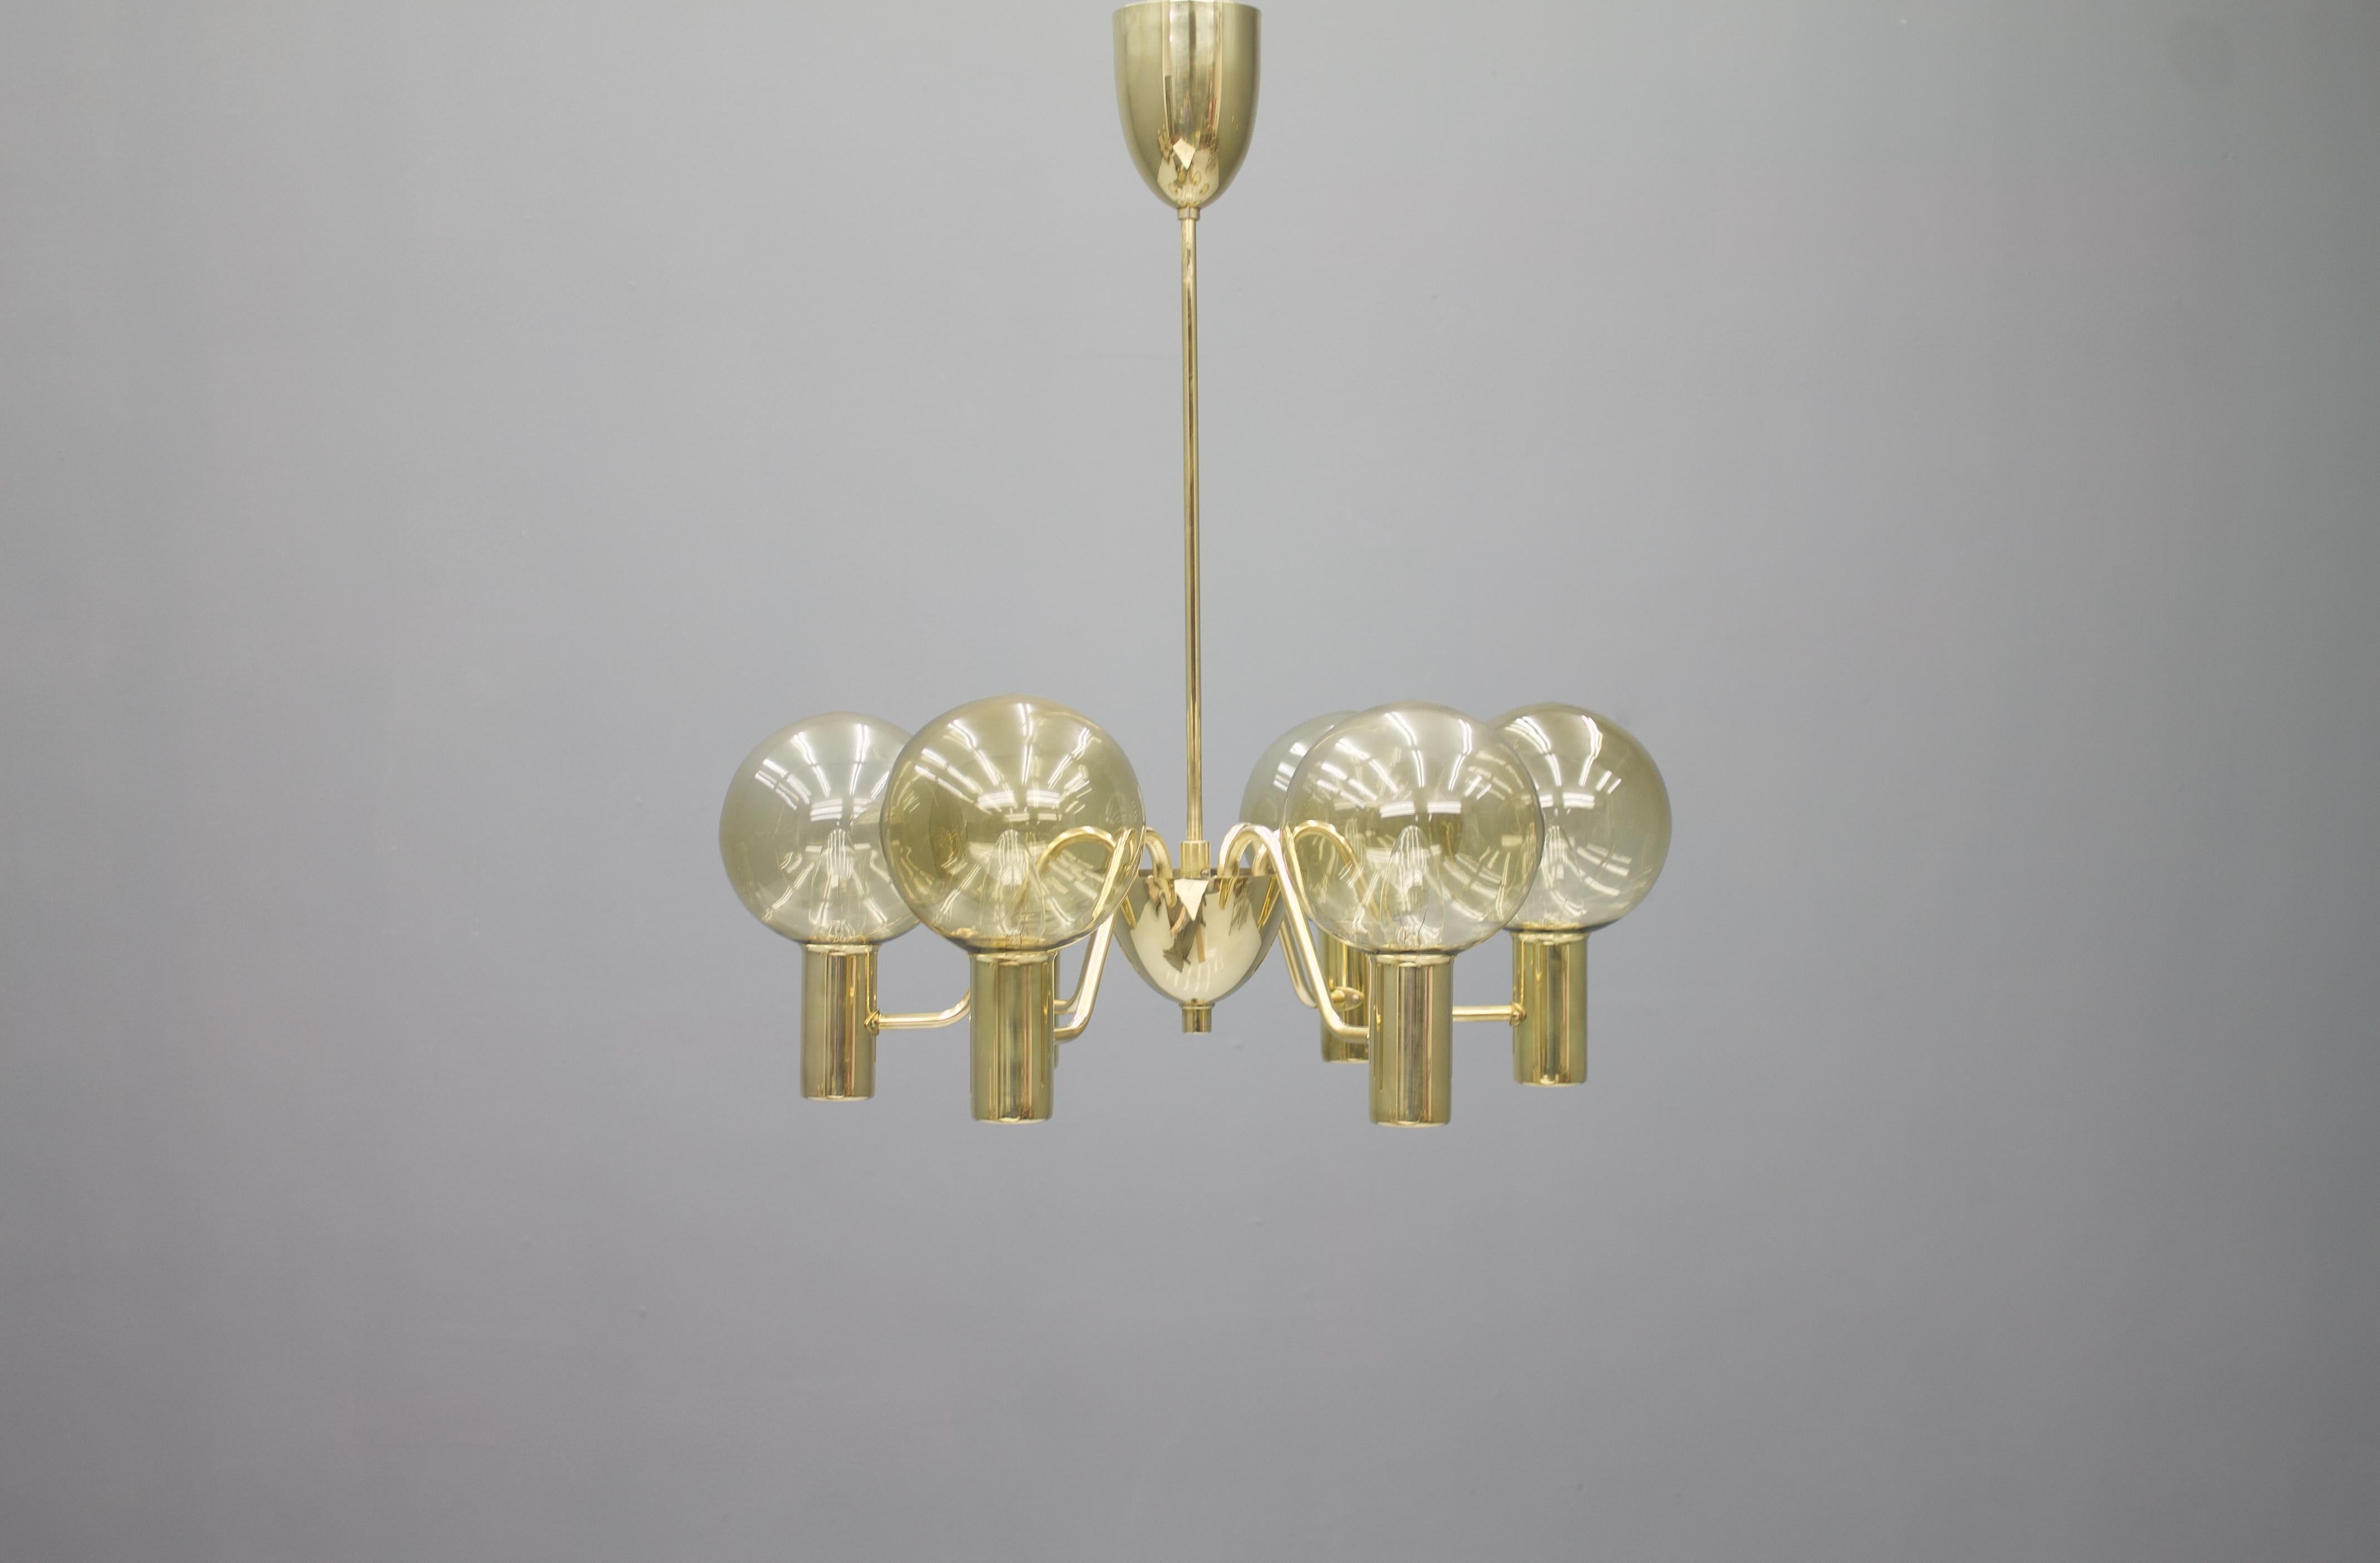 Hans-Agne Jakobsson chandelier Patricia T 372/6 brass and glass, Sweden, 1960s.
Very good condition.
A replacement glass is available and comes with it.